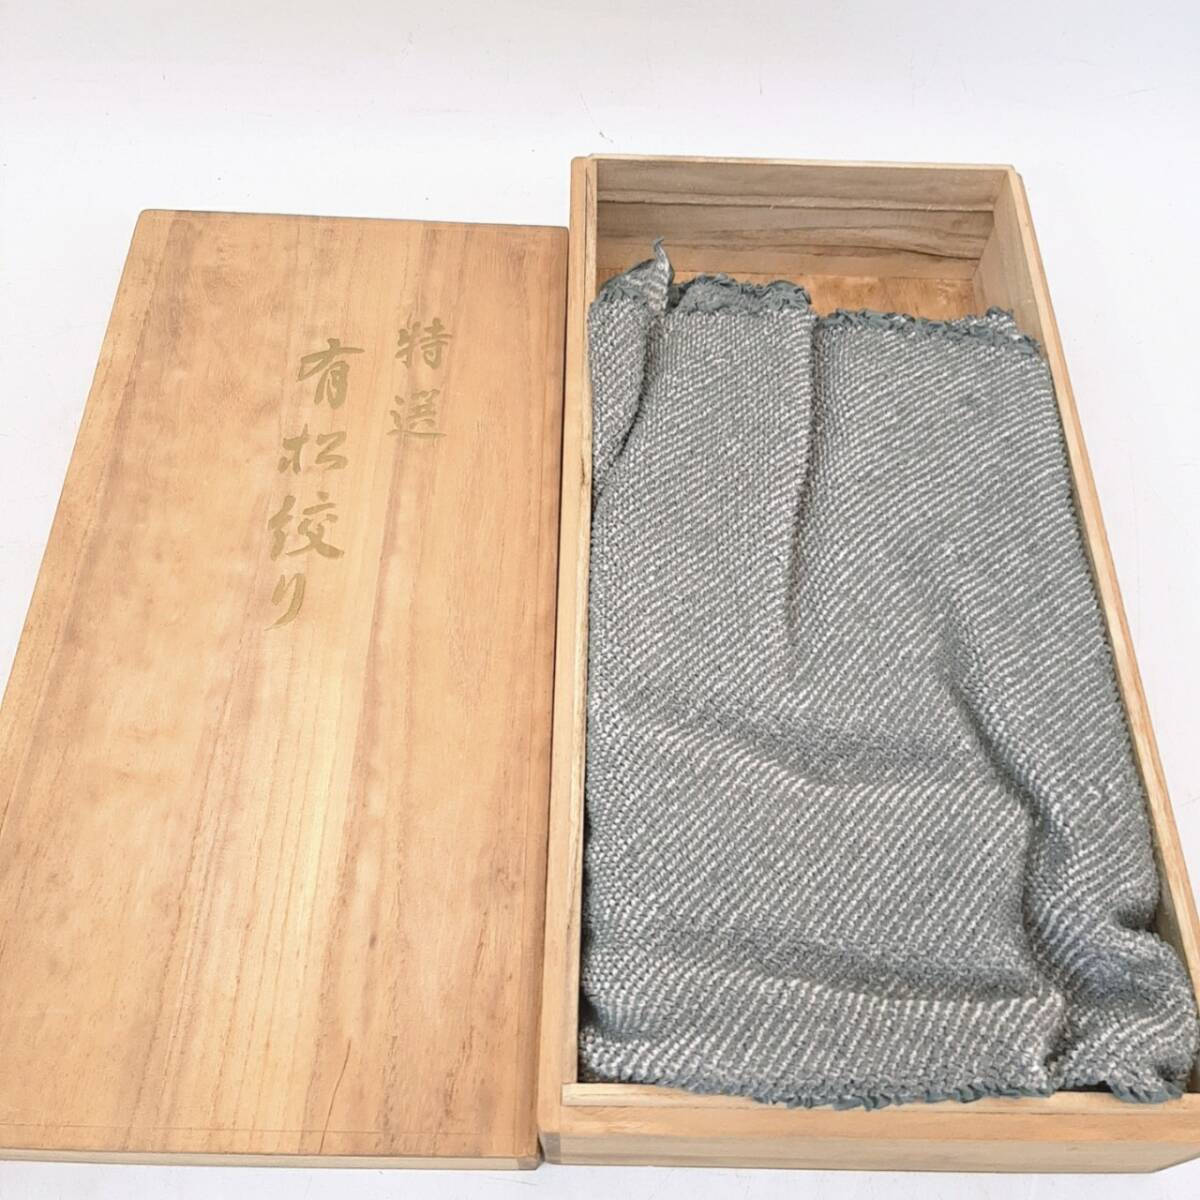 j240[1 jpy ~] special selection have pine aperture stop set kimono small articles remake raw materials summarize long-term keeping goods 